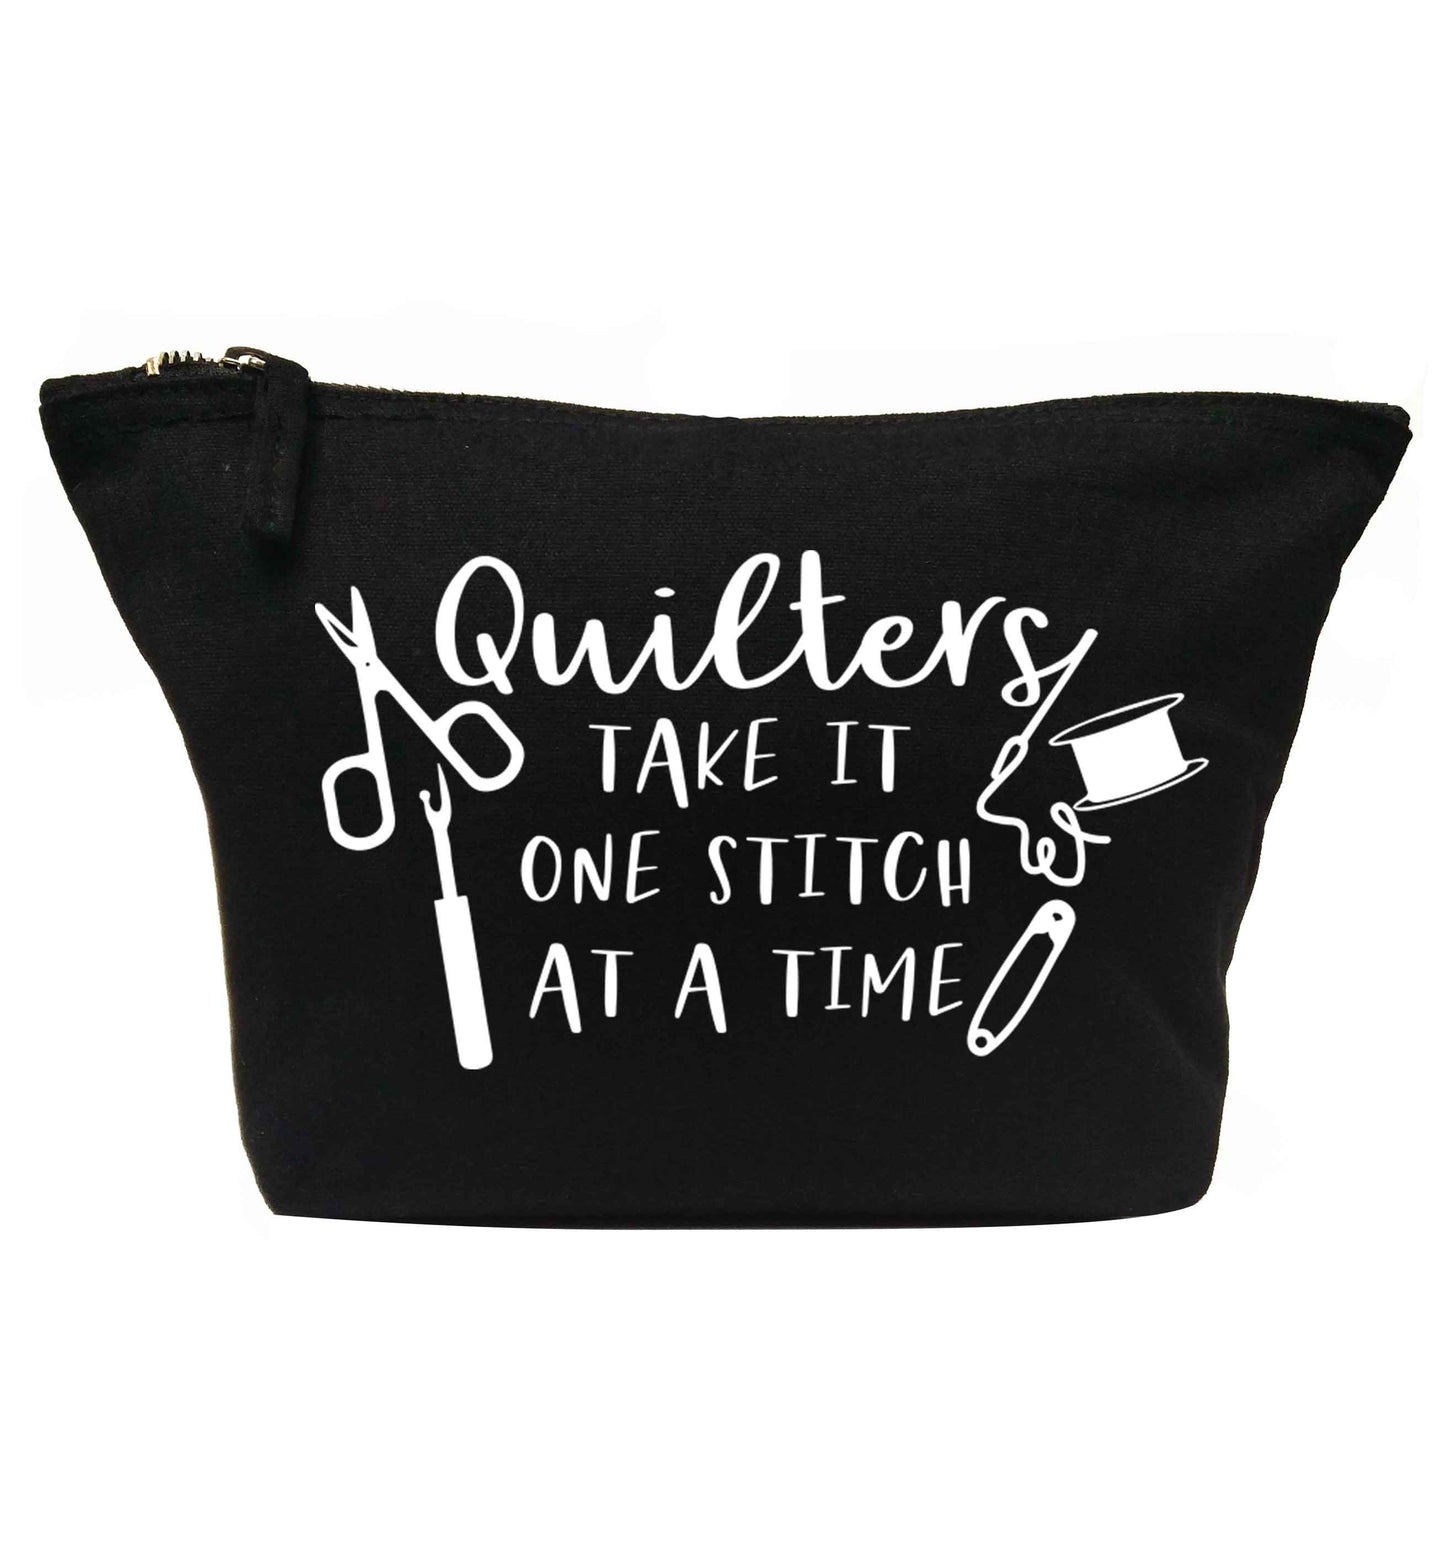 Quilters take it one stitch at a time  | makeup / wash bag